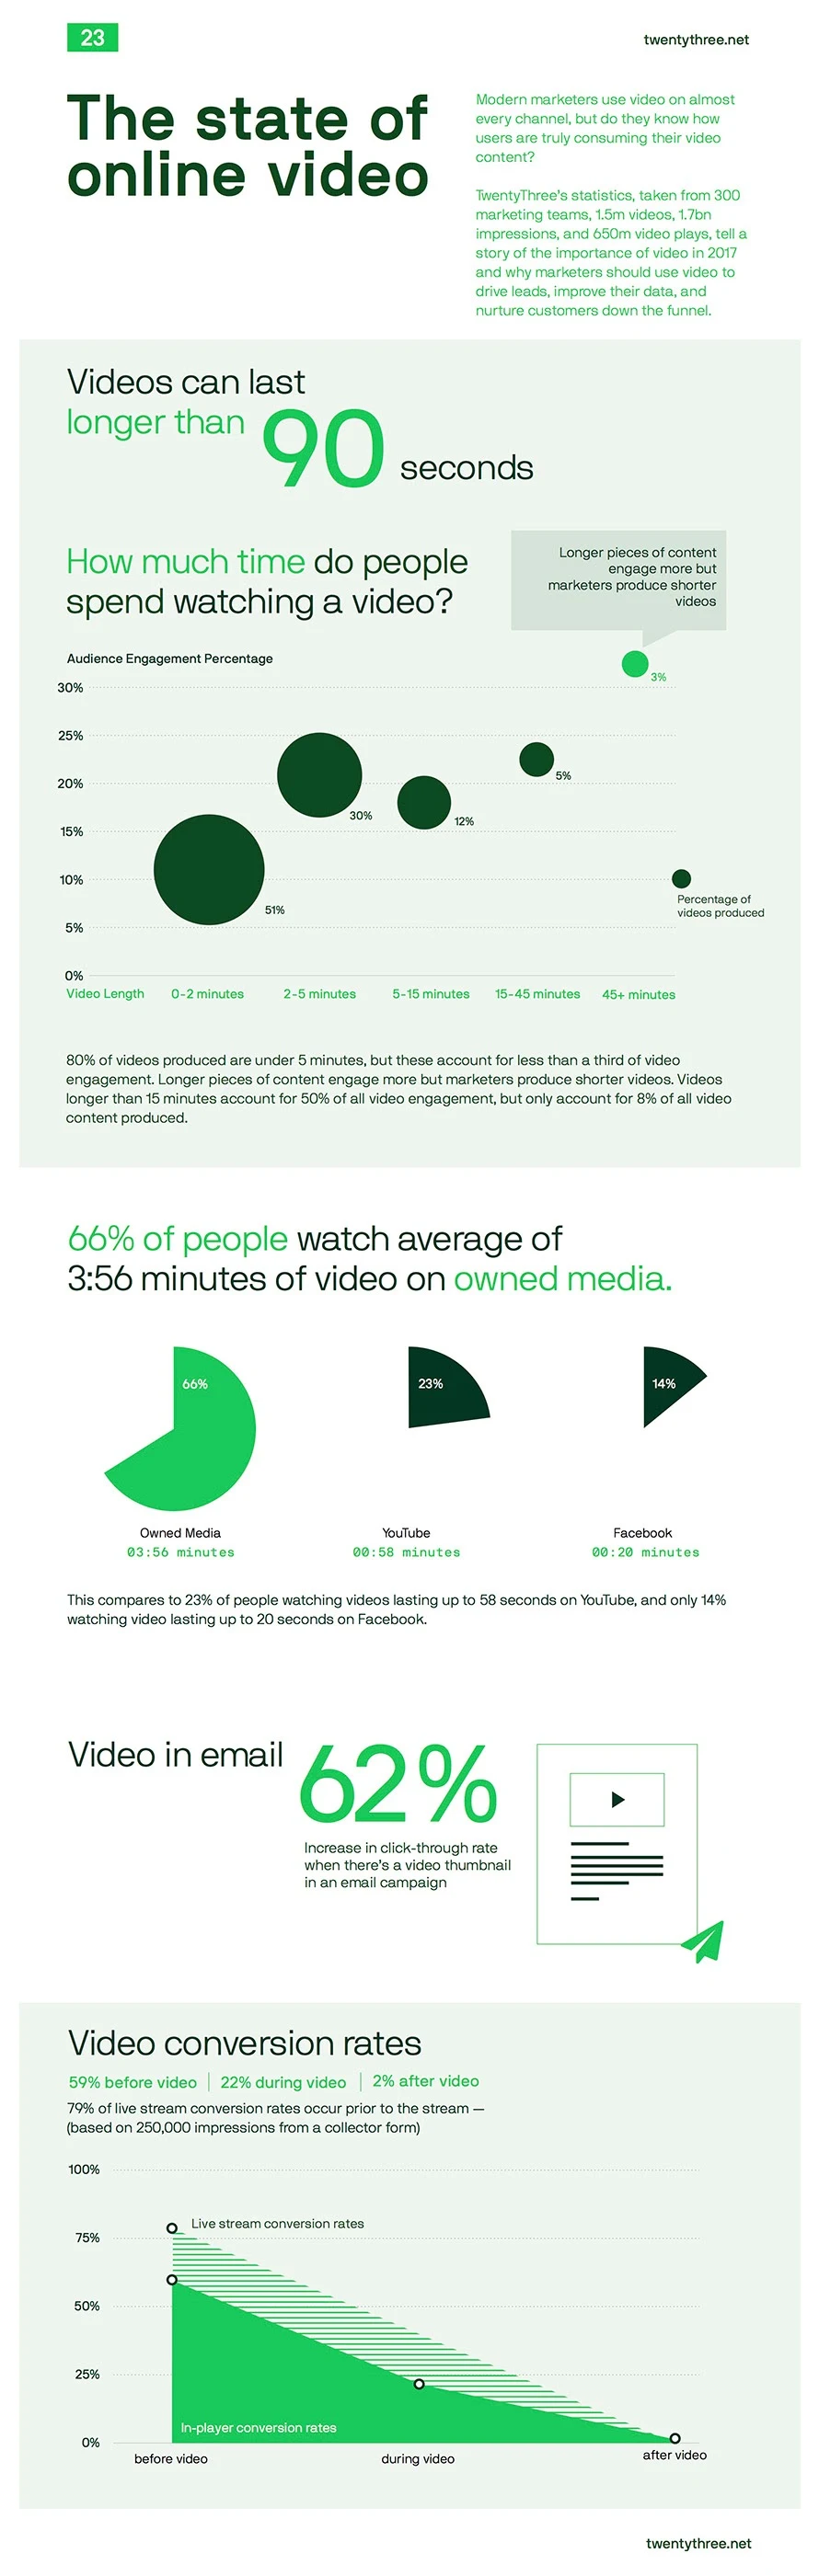 The State of Online Video - #infographic